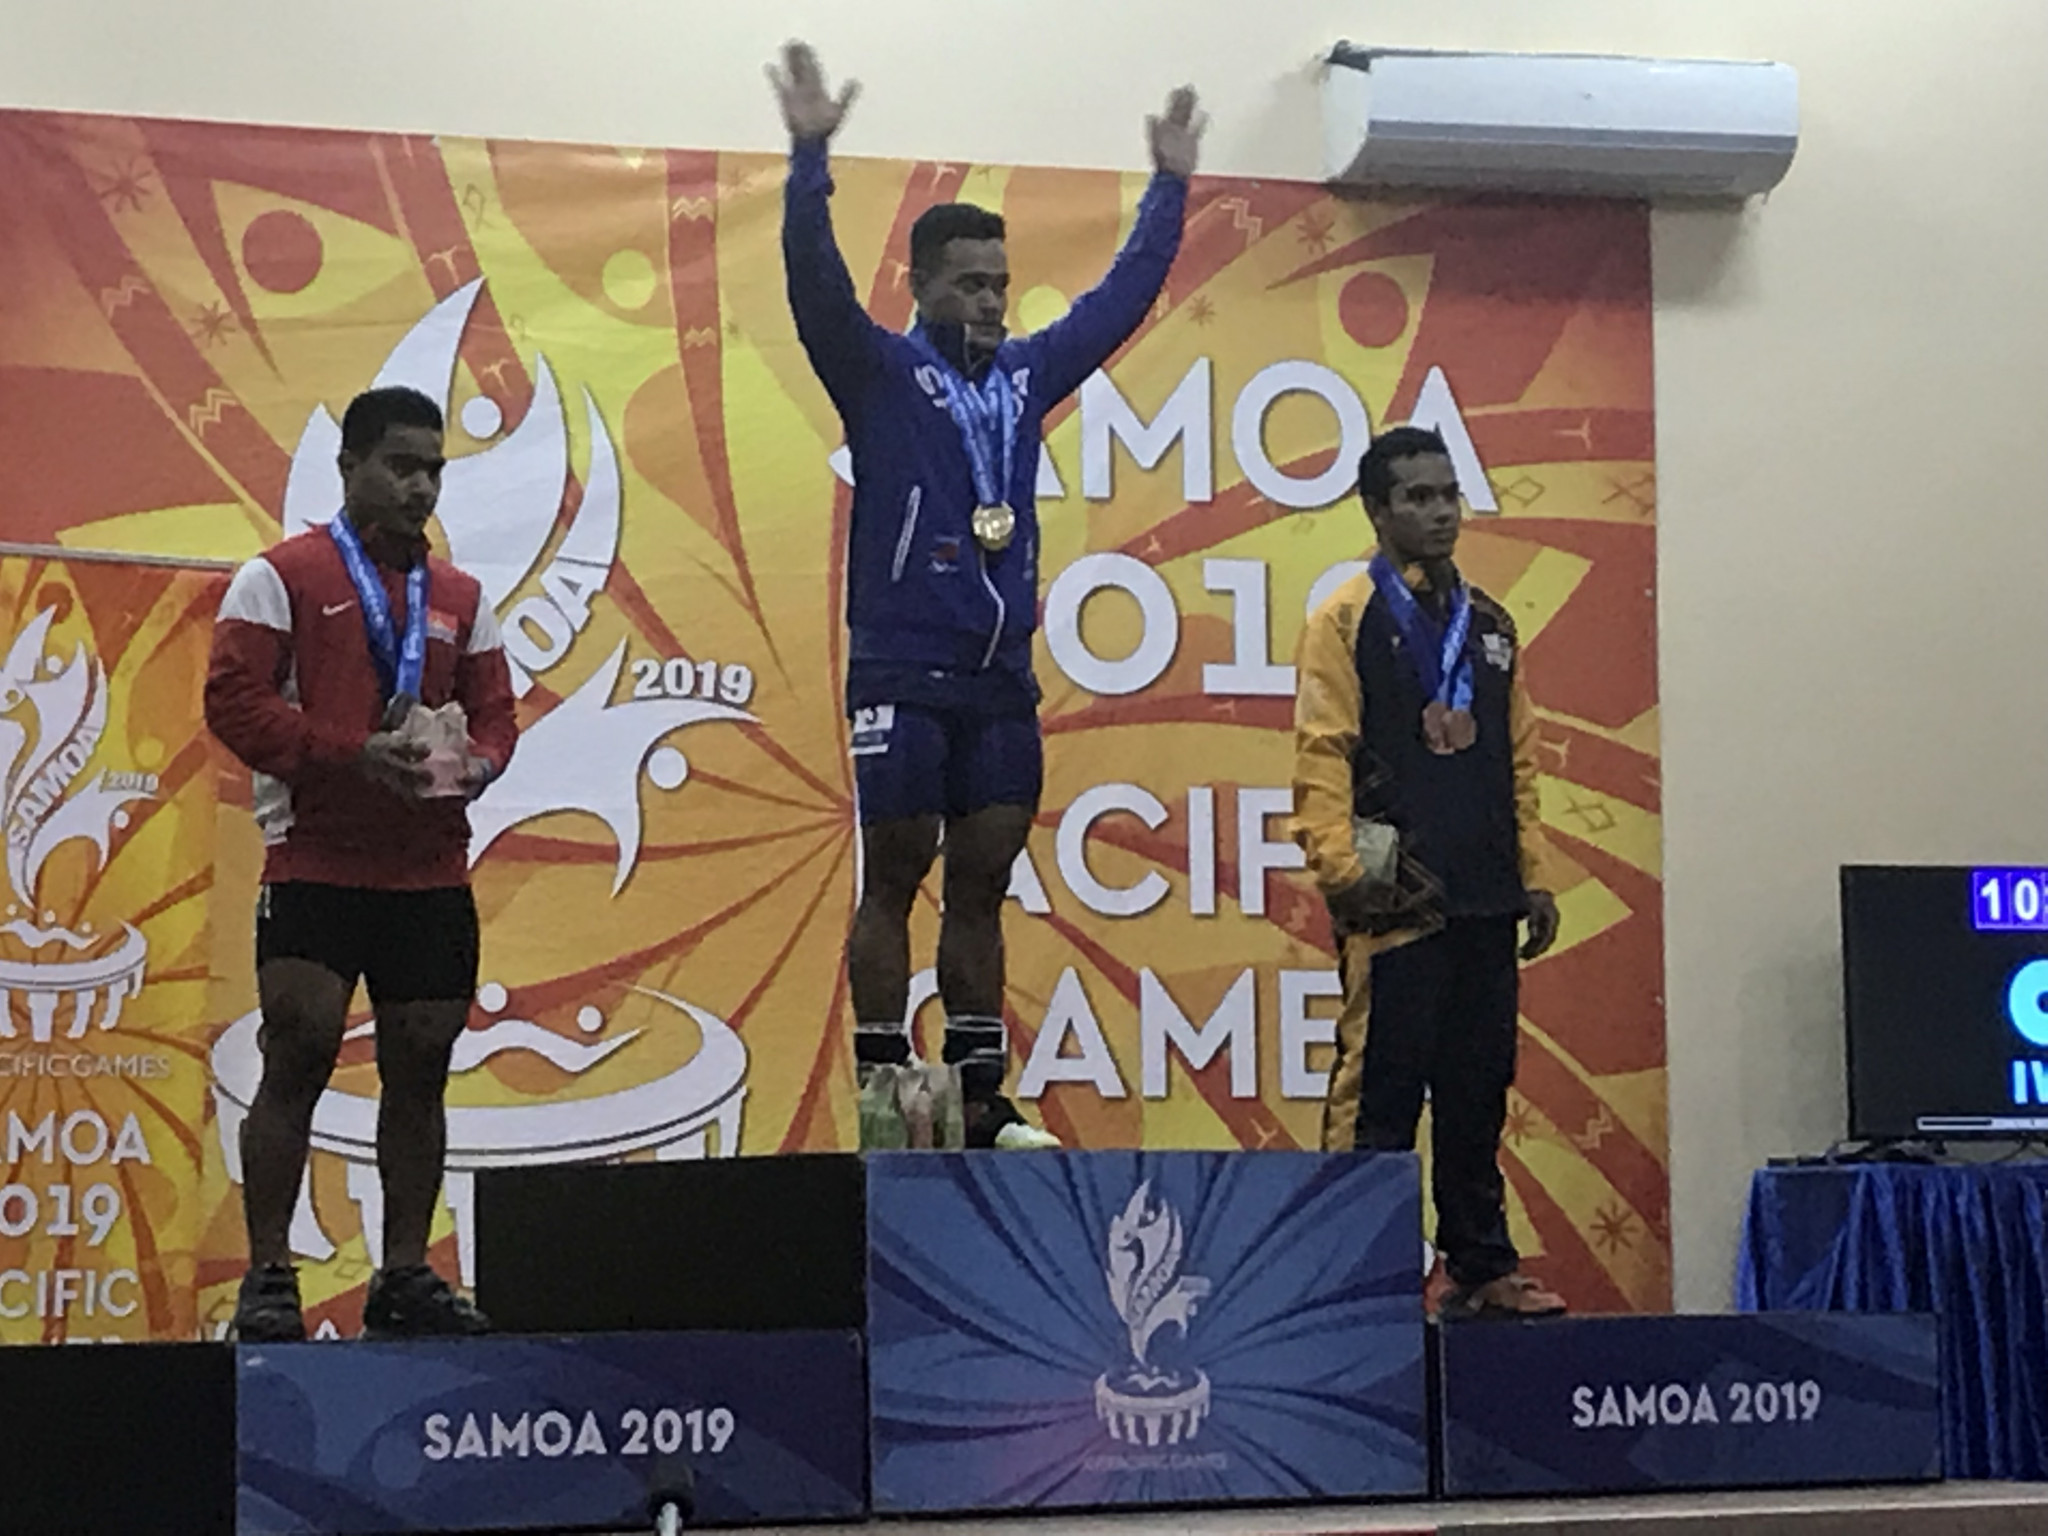 Samoan hero Ioane sets Oceania record on way to three weightlifting golds at 2019 Pacific Games